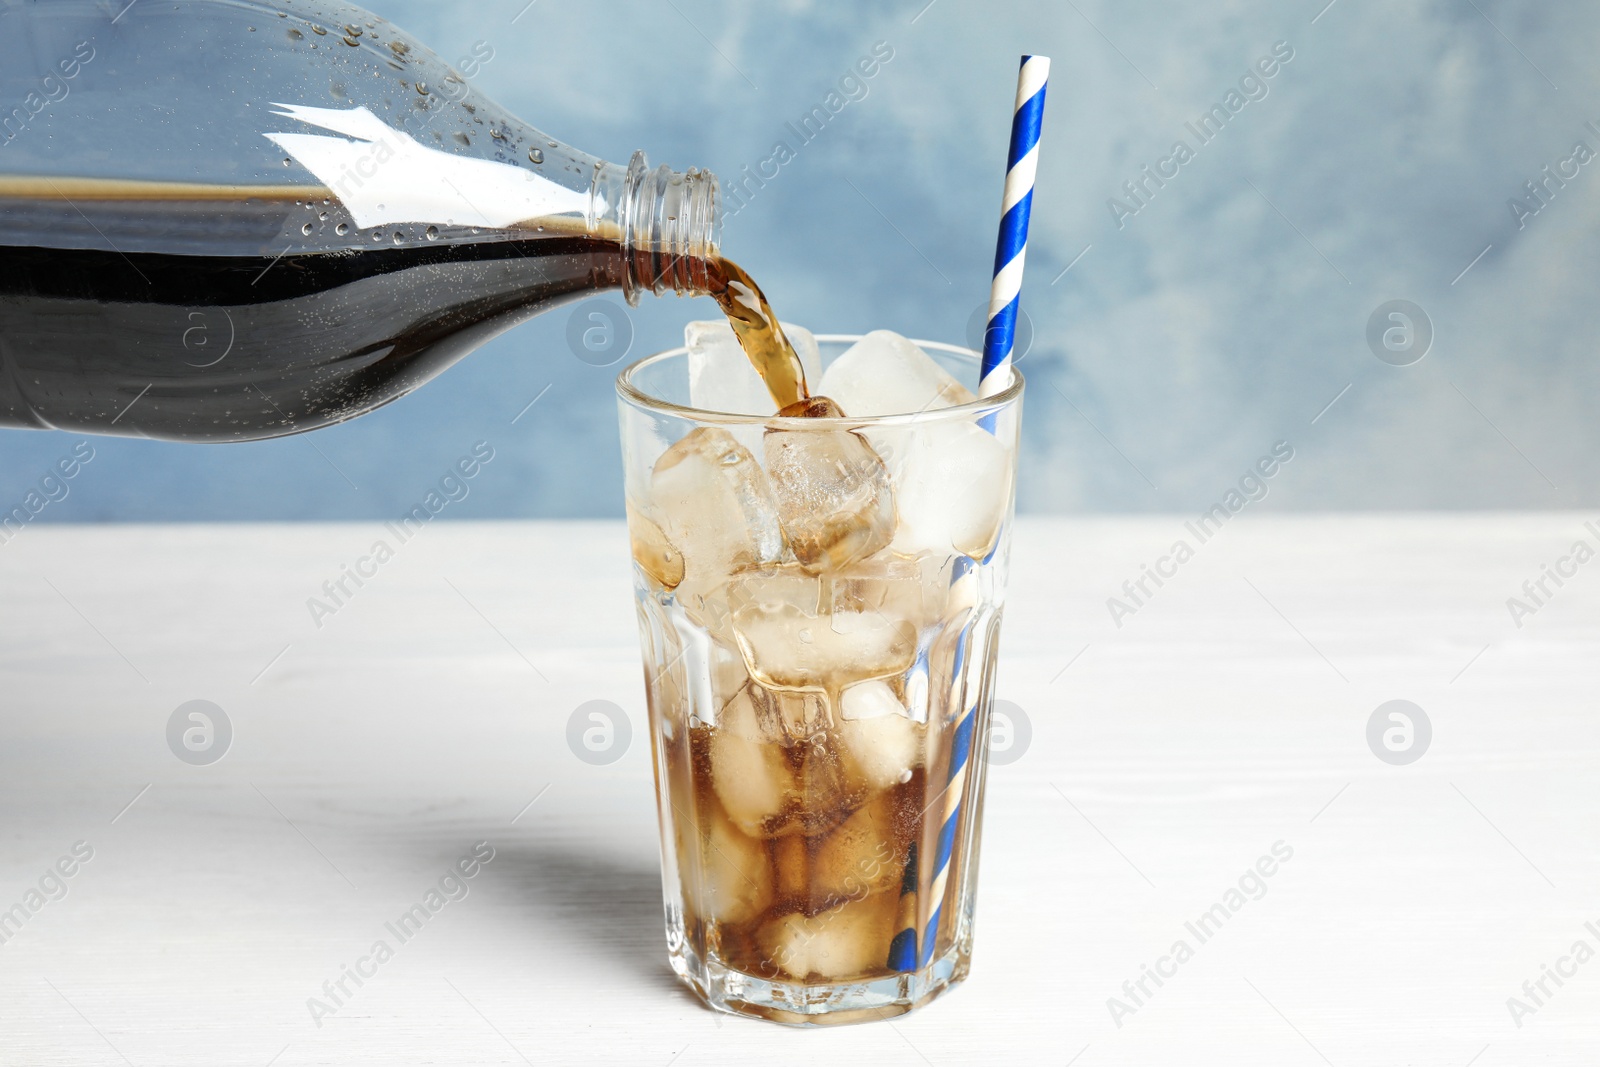 Photo of Pouring refreshing soda drink into glass with ice cubes on white wooden table against blue background